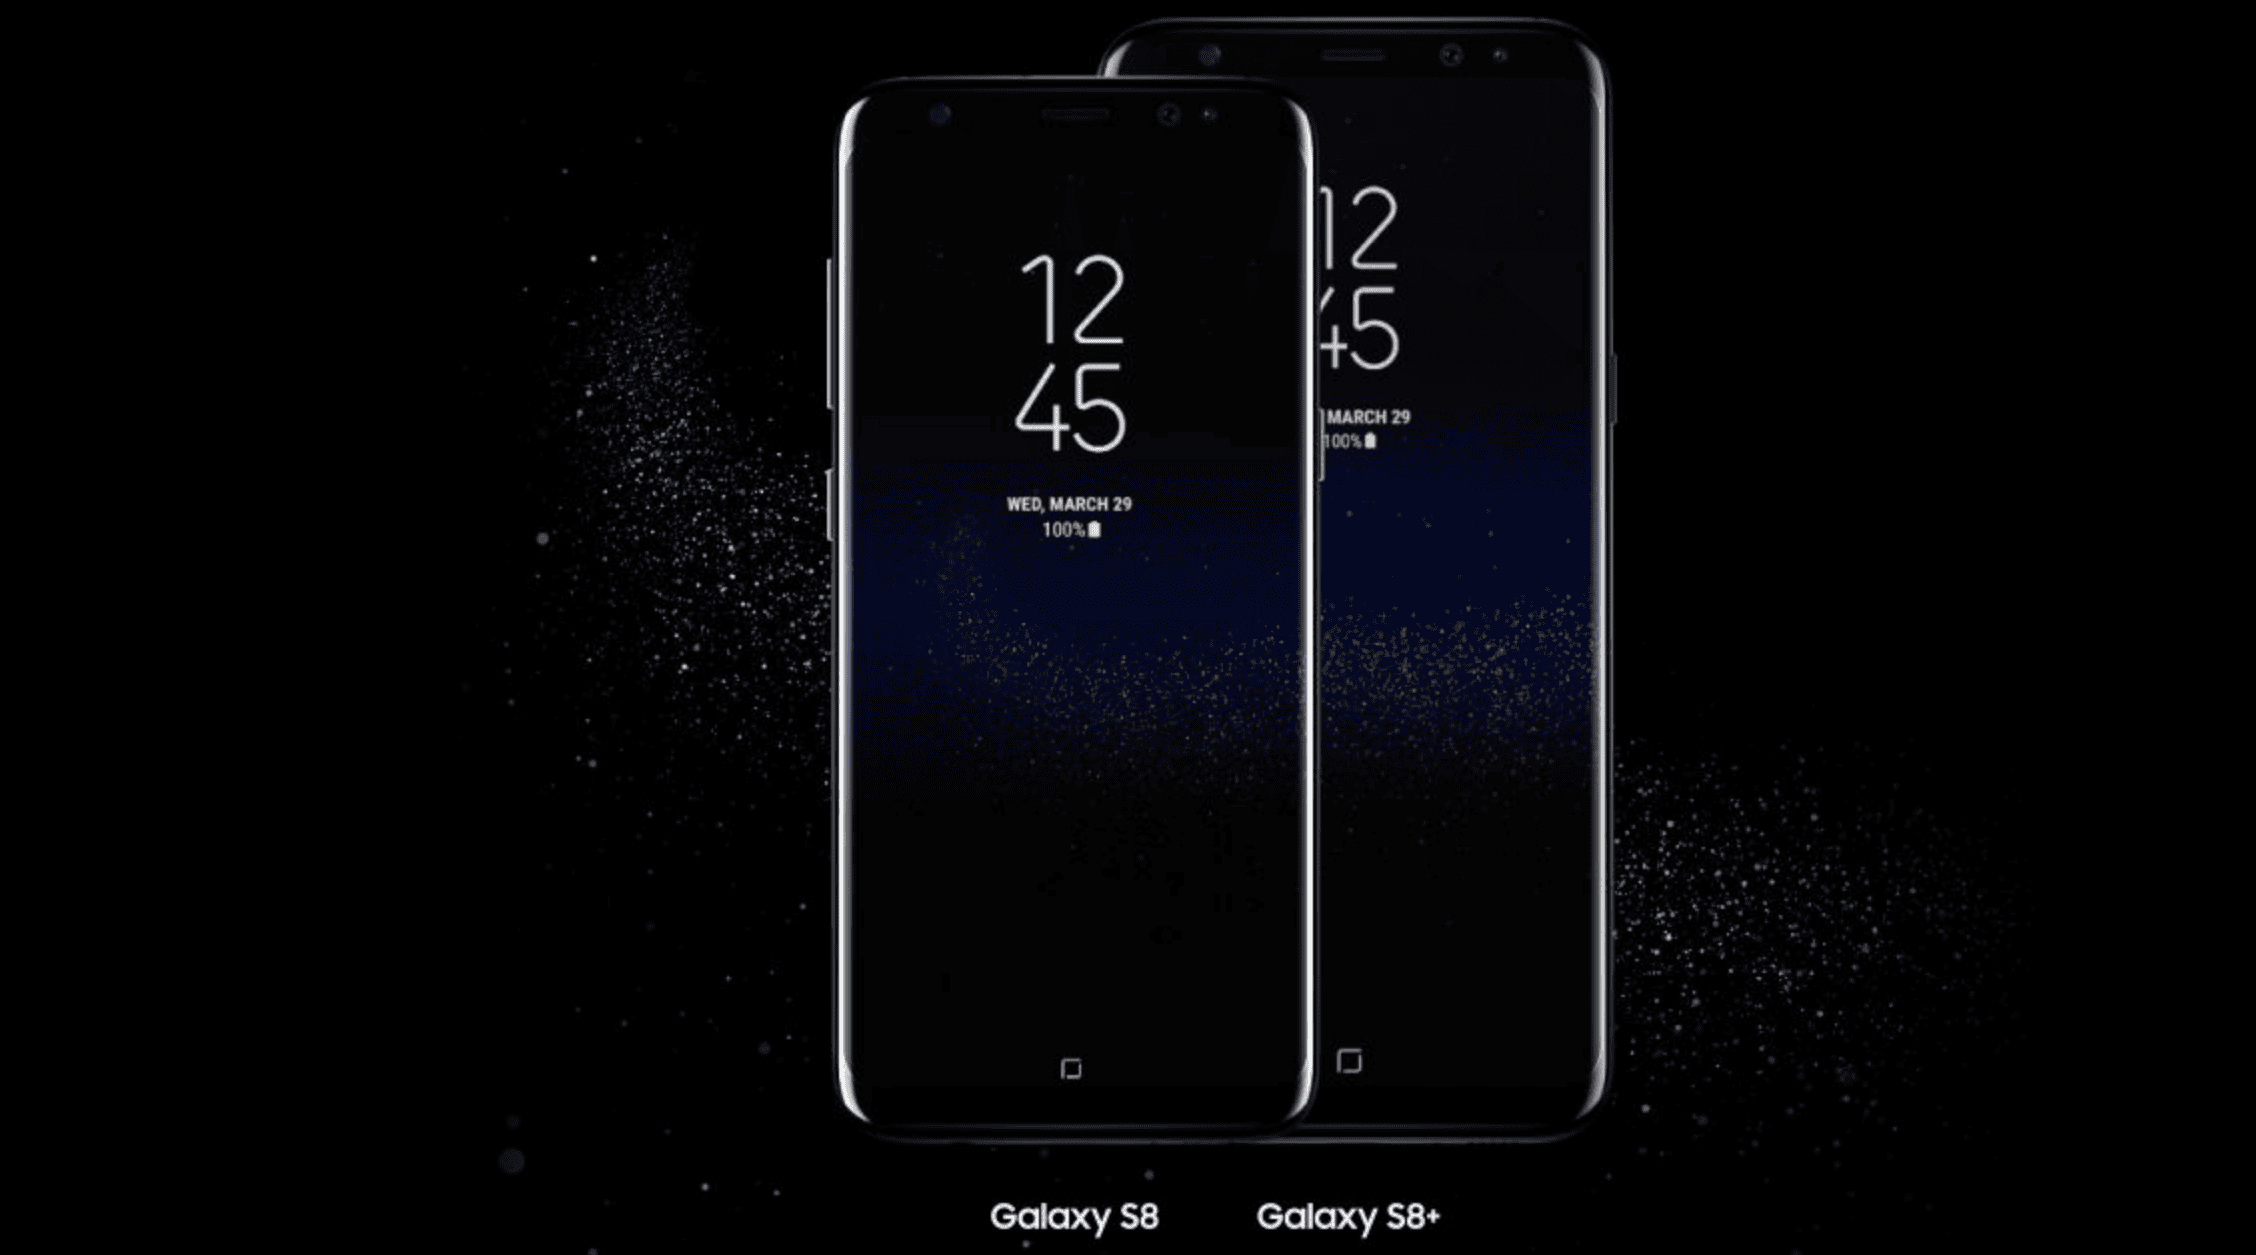 Samsung Galaxy S8/S8+ can now be updated to Android Pie 9